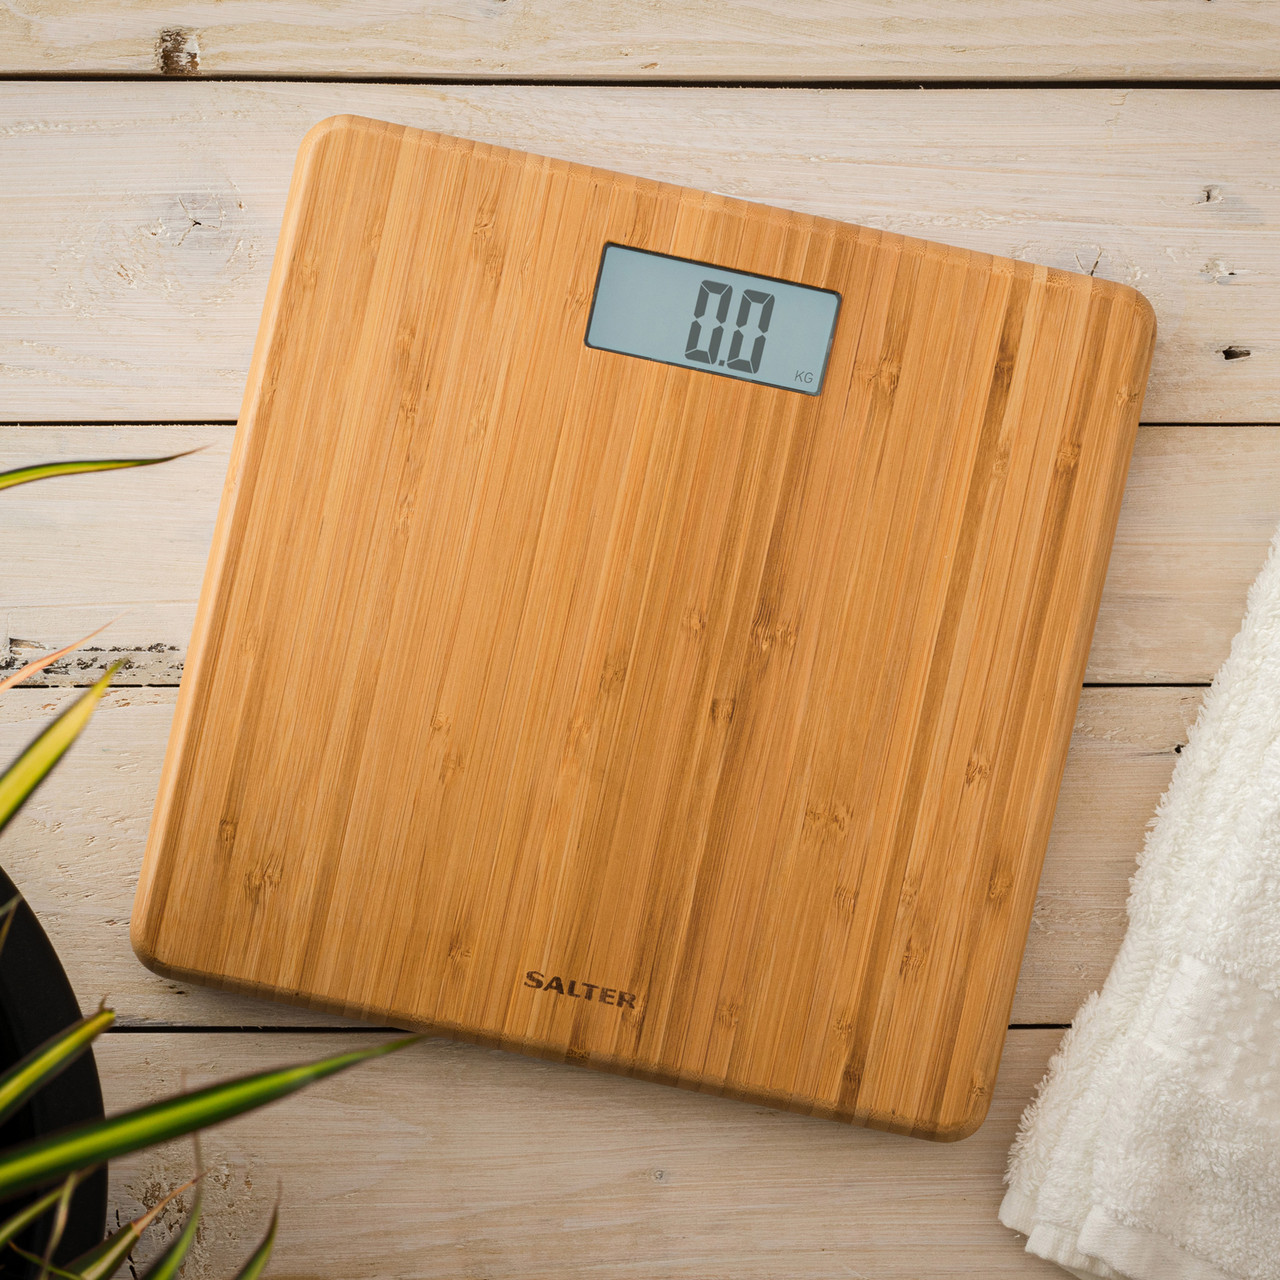 https://cdn11.bigcommerce.com/s-5vfc75n1yv/images/stencil/1280x1280/products/2174/30181/eco-fsc-bamboo-electronic-bathroom-scale-with-easy-to-read-backlit-display-150kg-capacity-salter-9294-wd3reu16-5054061479768__10217.1698134027.jpg?c=1